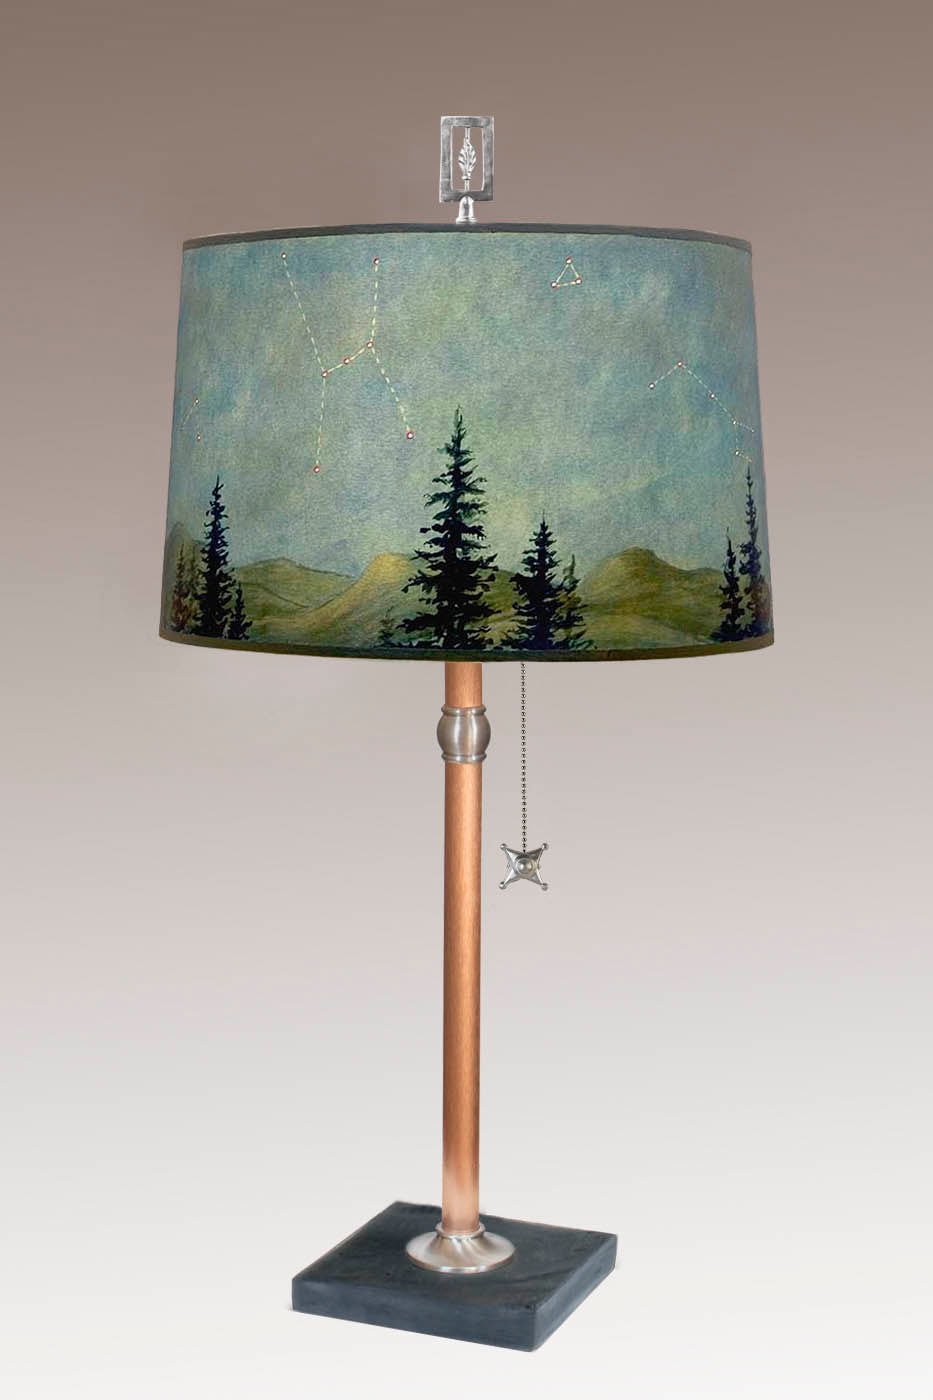 Janna Ugone &amp; Co Table Lamps Copper Table Lamp with Large Drum Shade in Midnight Sky